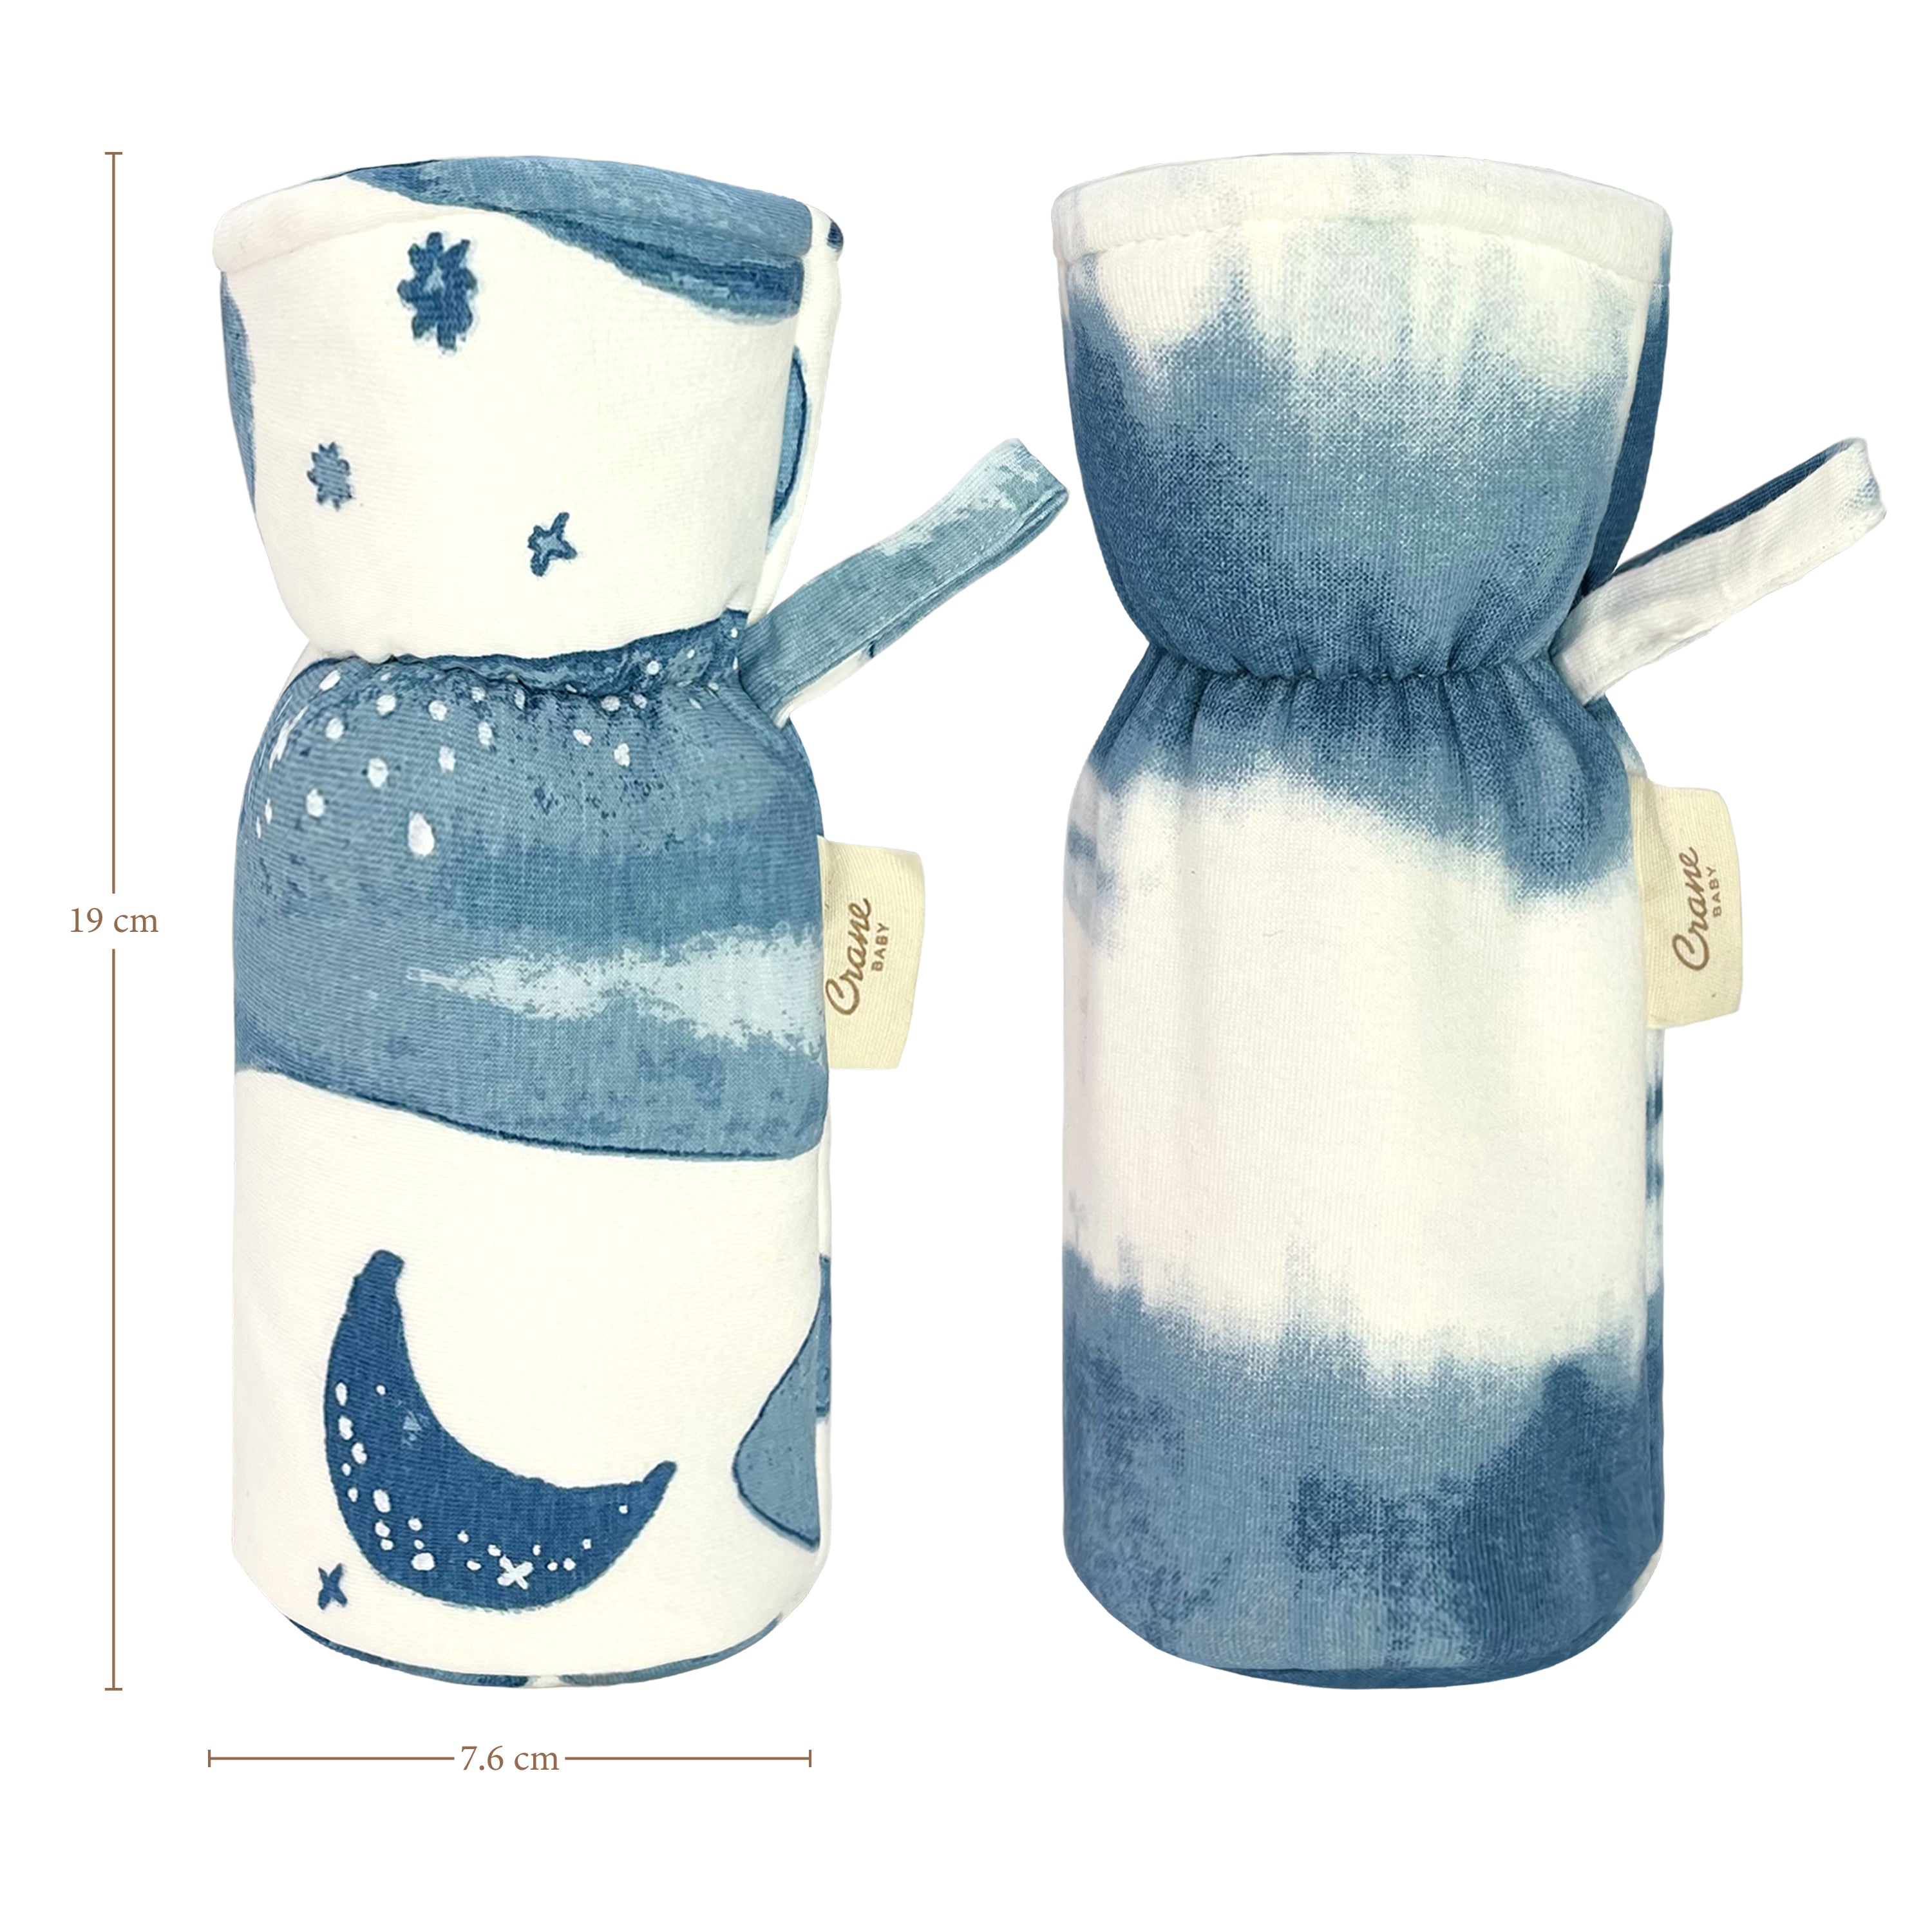 Crane Baby Bottle Cover/Warmer Caspian Collection, Pack of 2 - Blue